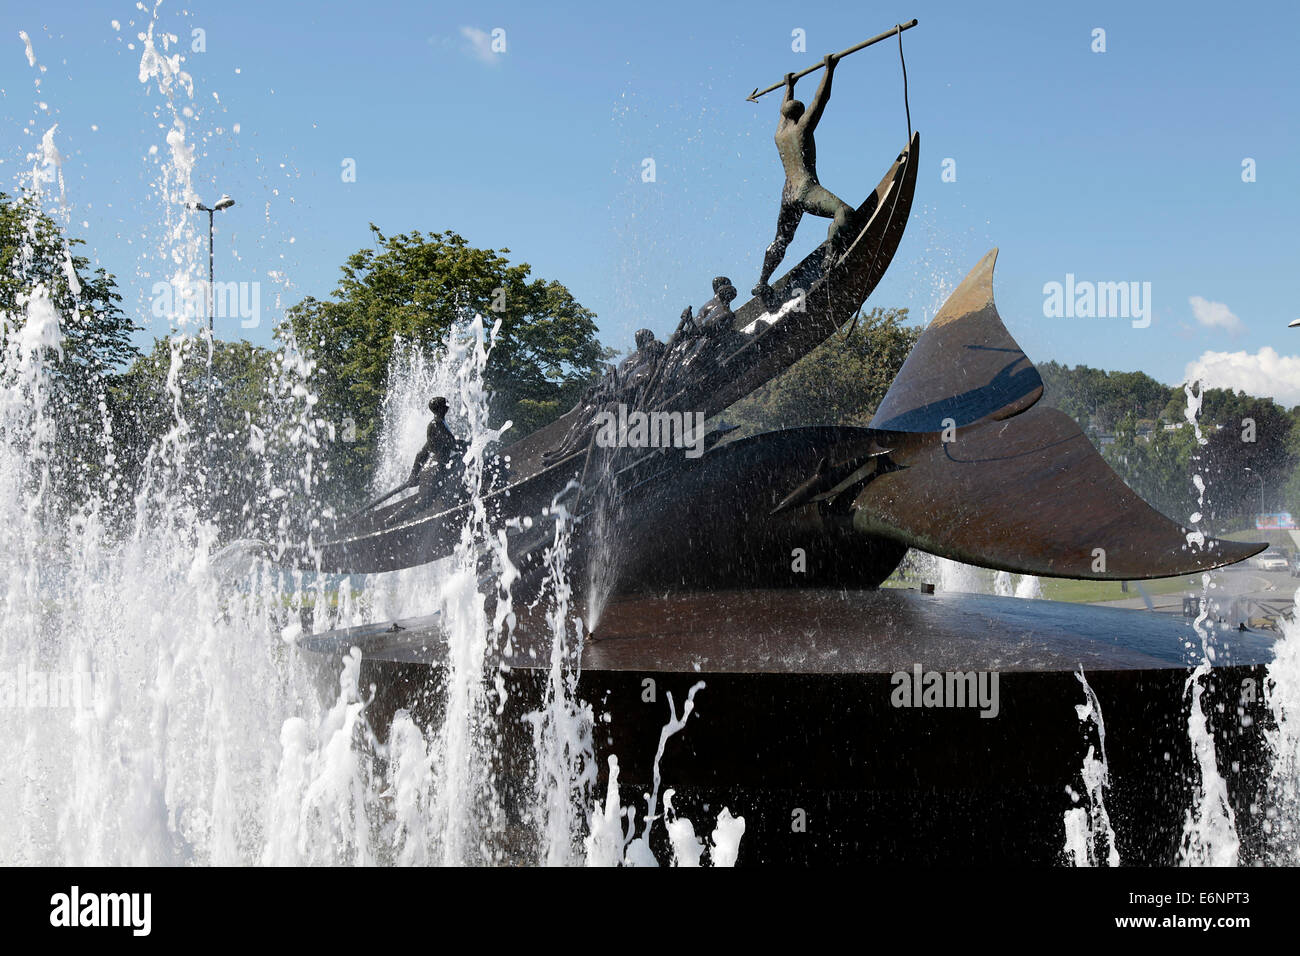 Untill 1968 Sandefjord was the center of whaling in Norway. The whaling brought prosperity. To commemorate the Whaling Monument was erected. Photo: Klaus Nowottnick Date: June 7, 2014 Stock Photo